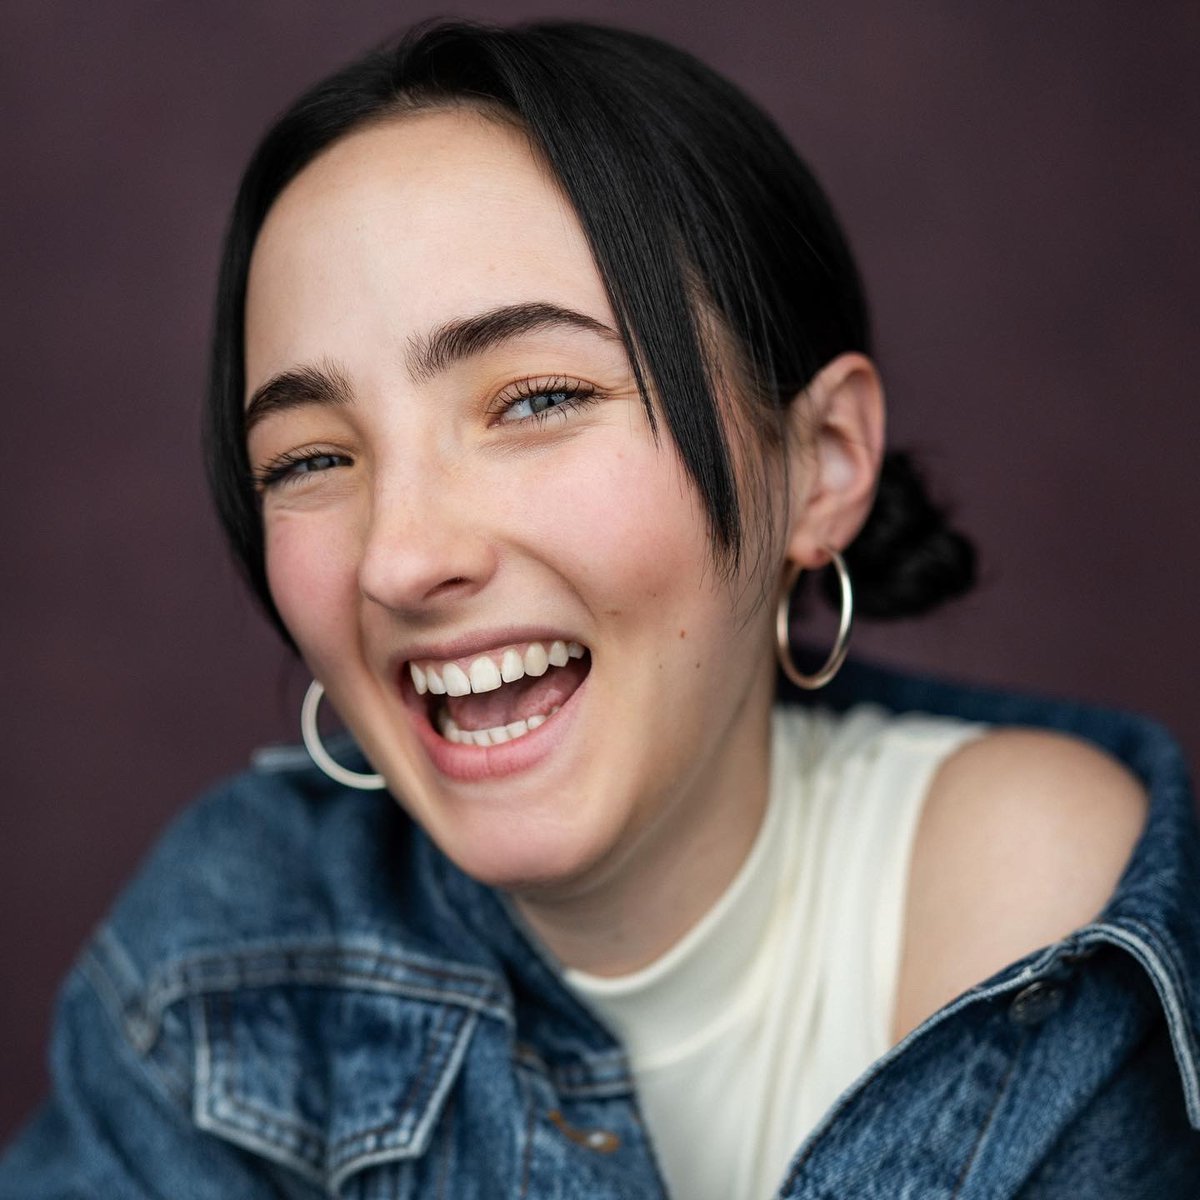 #NewAssociates 2024/25: @justsophiejane Sophie has over 50 credits to her name within film, theatre, commercial work and voice over. Her current focus is on physical theatre and writing poetry under her social media @inlimbophase. More about Sophie: bit.ly/NA202425